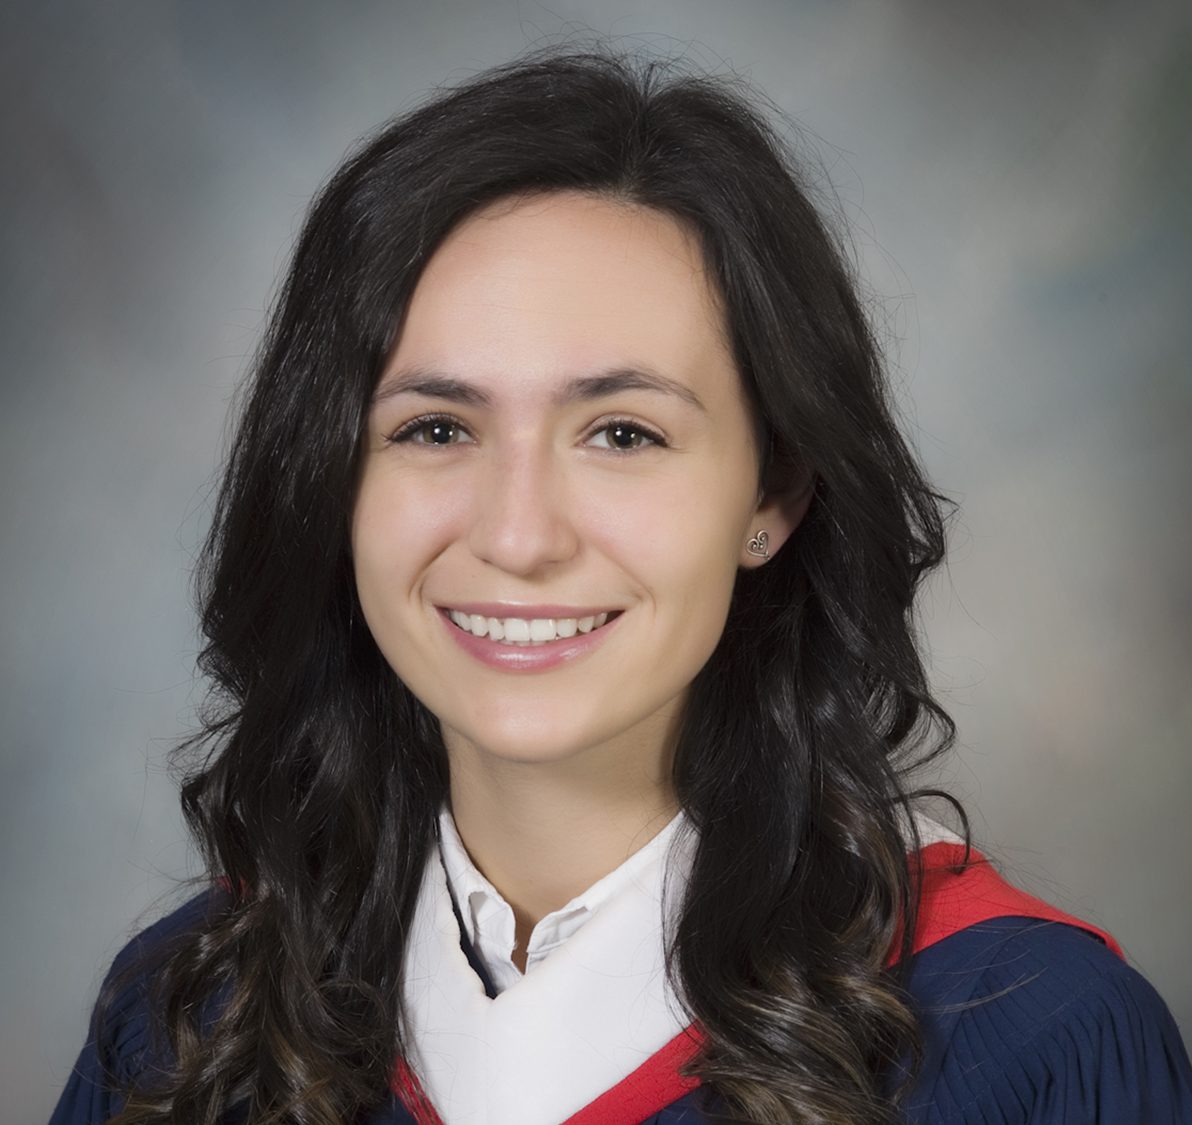 Rebecca Lepore an undergrad from the Faculty of Social Sciences was the recipient of the Spirit of Brock award at Spring Convocation.